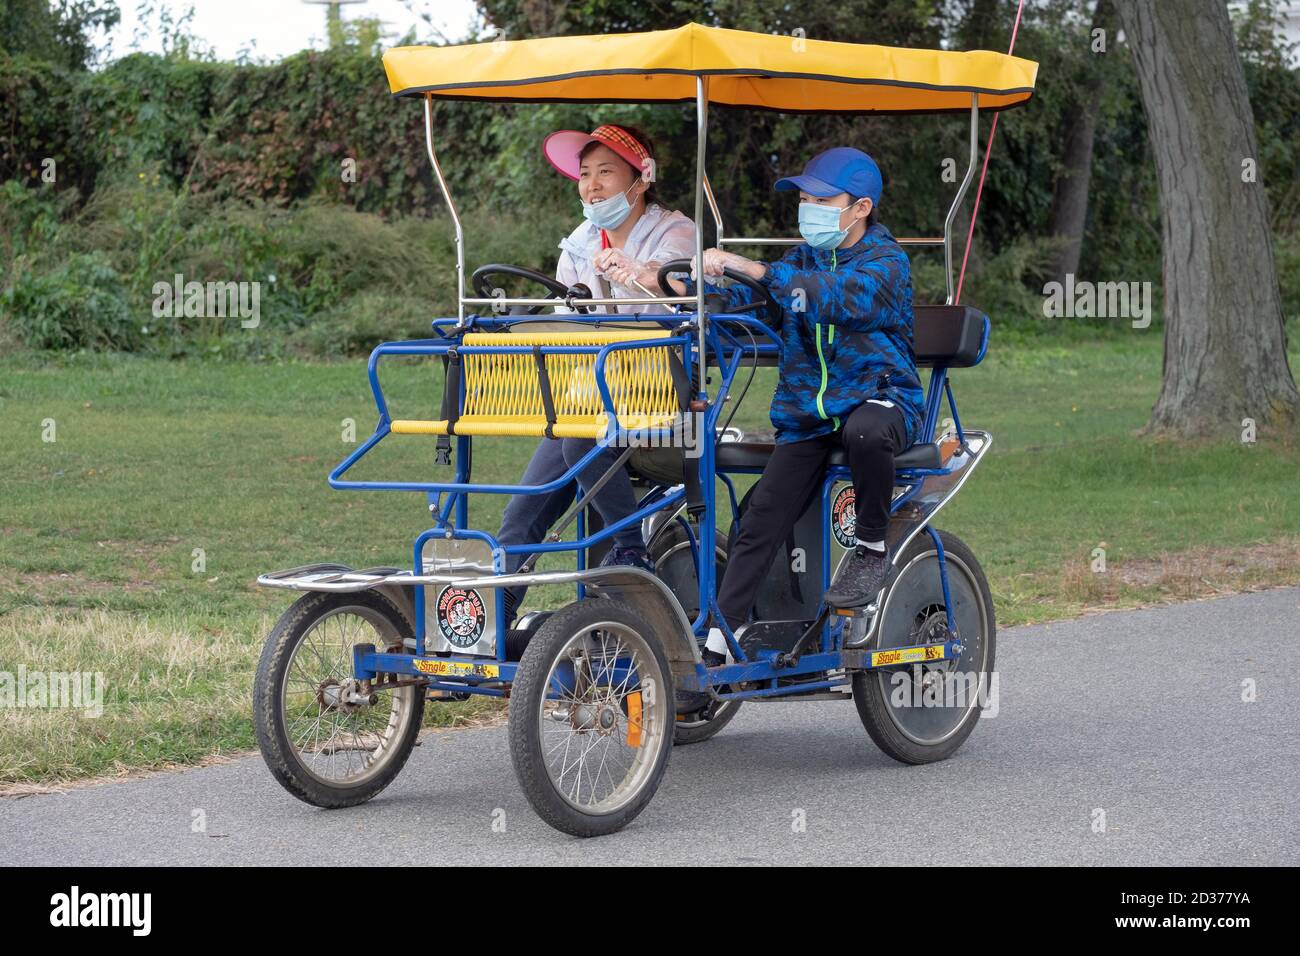 A mother and son wearing masks ride a rented Wheel Fun  4 wheel surrey cycle. In Flushing Meadows Corona Park in Queens, New York City. Stock Photo